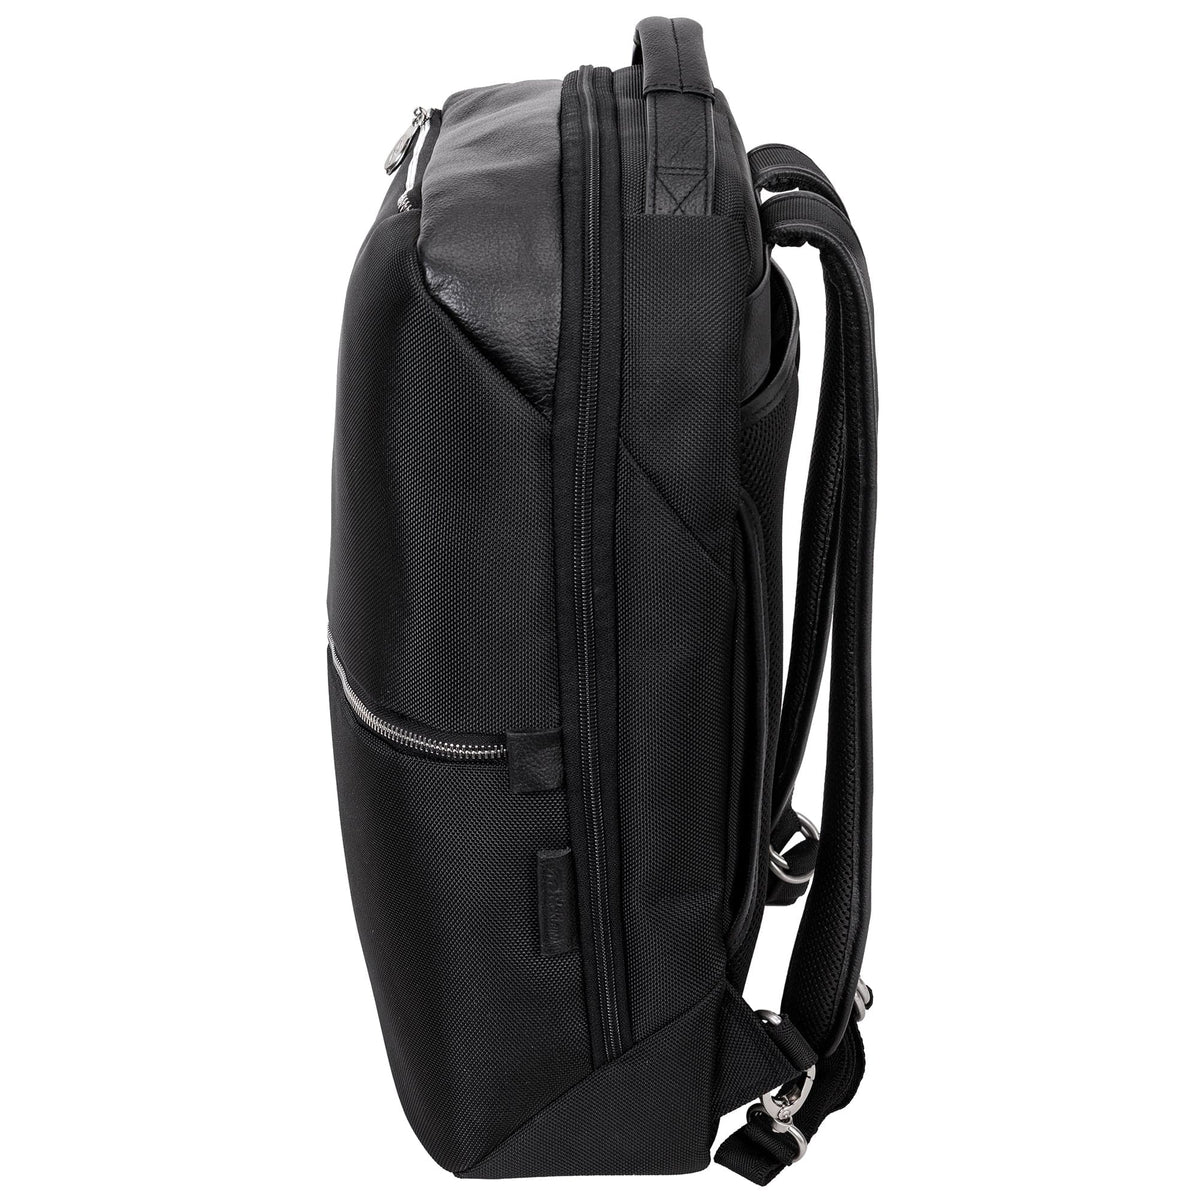 McKlein U Series East Side 17" Convertible Travel Backpack and Cross-Body Bag